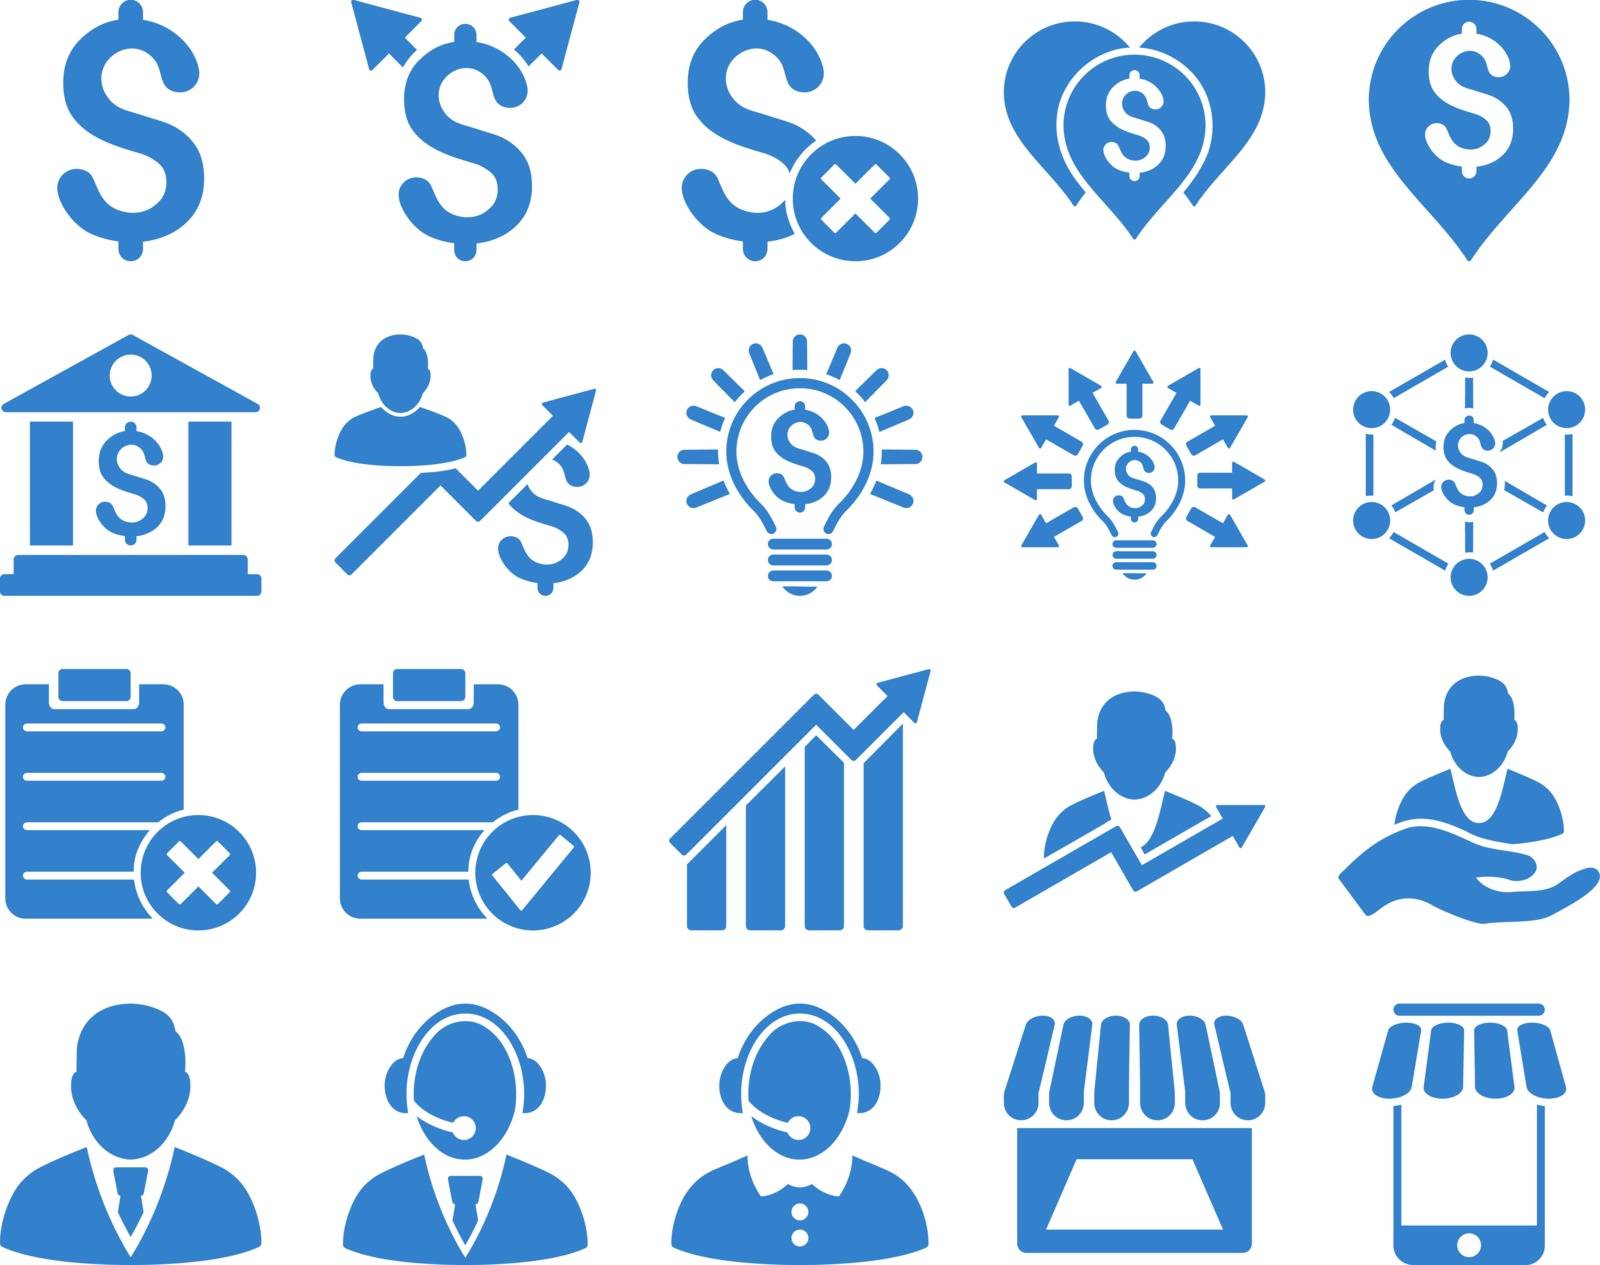 Trade business and bank service icon set. These flat icons use cobalt color. Images are isolated on a white background. Angles are rounded.